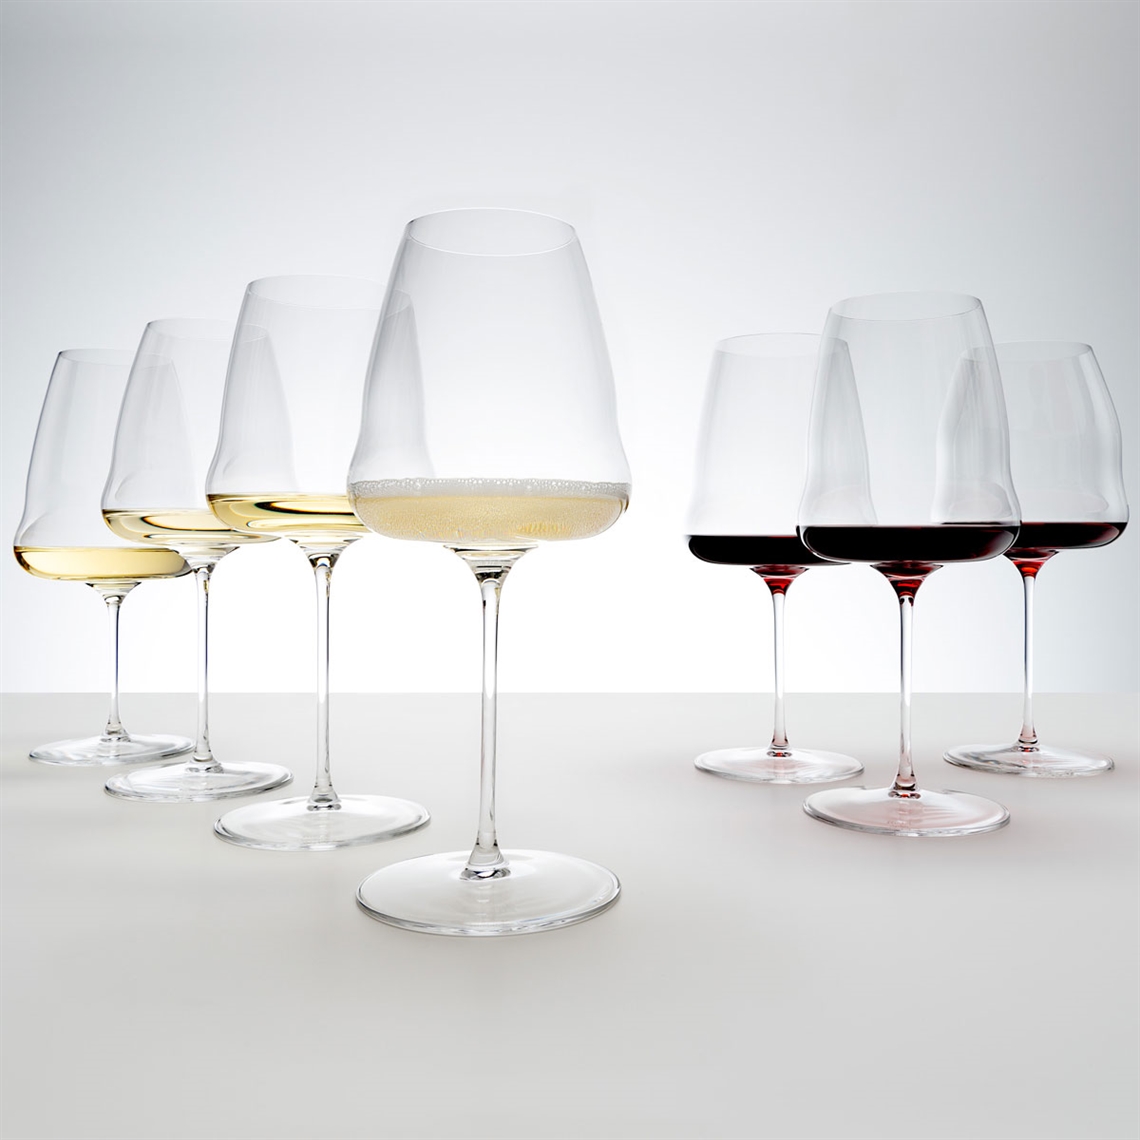 View our collection of Riedel Winewings Riedel Superleggero